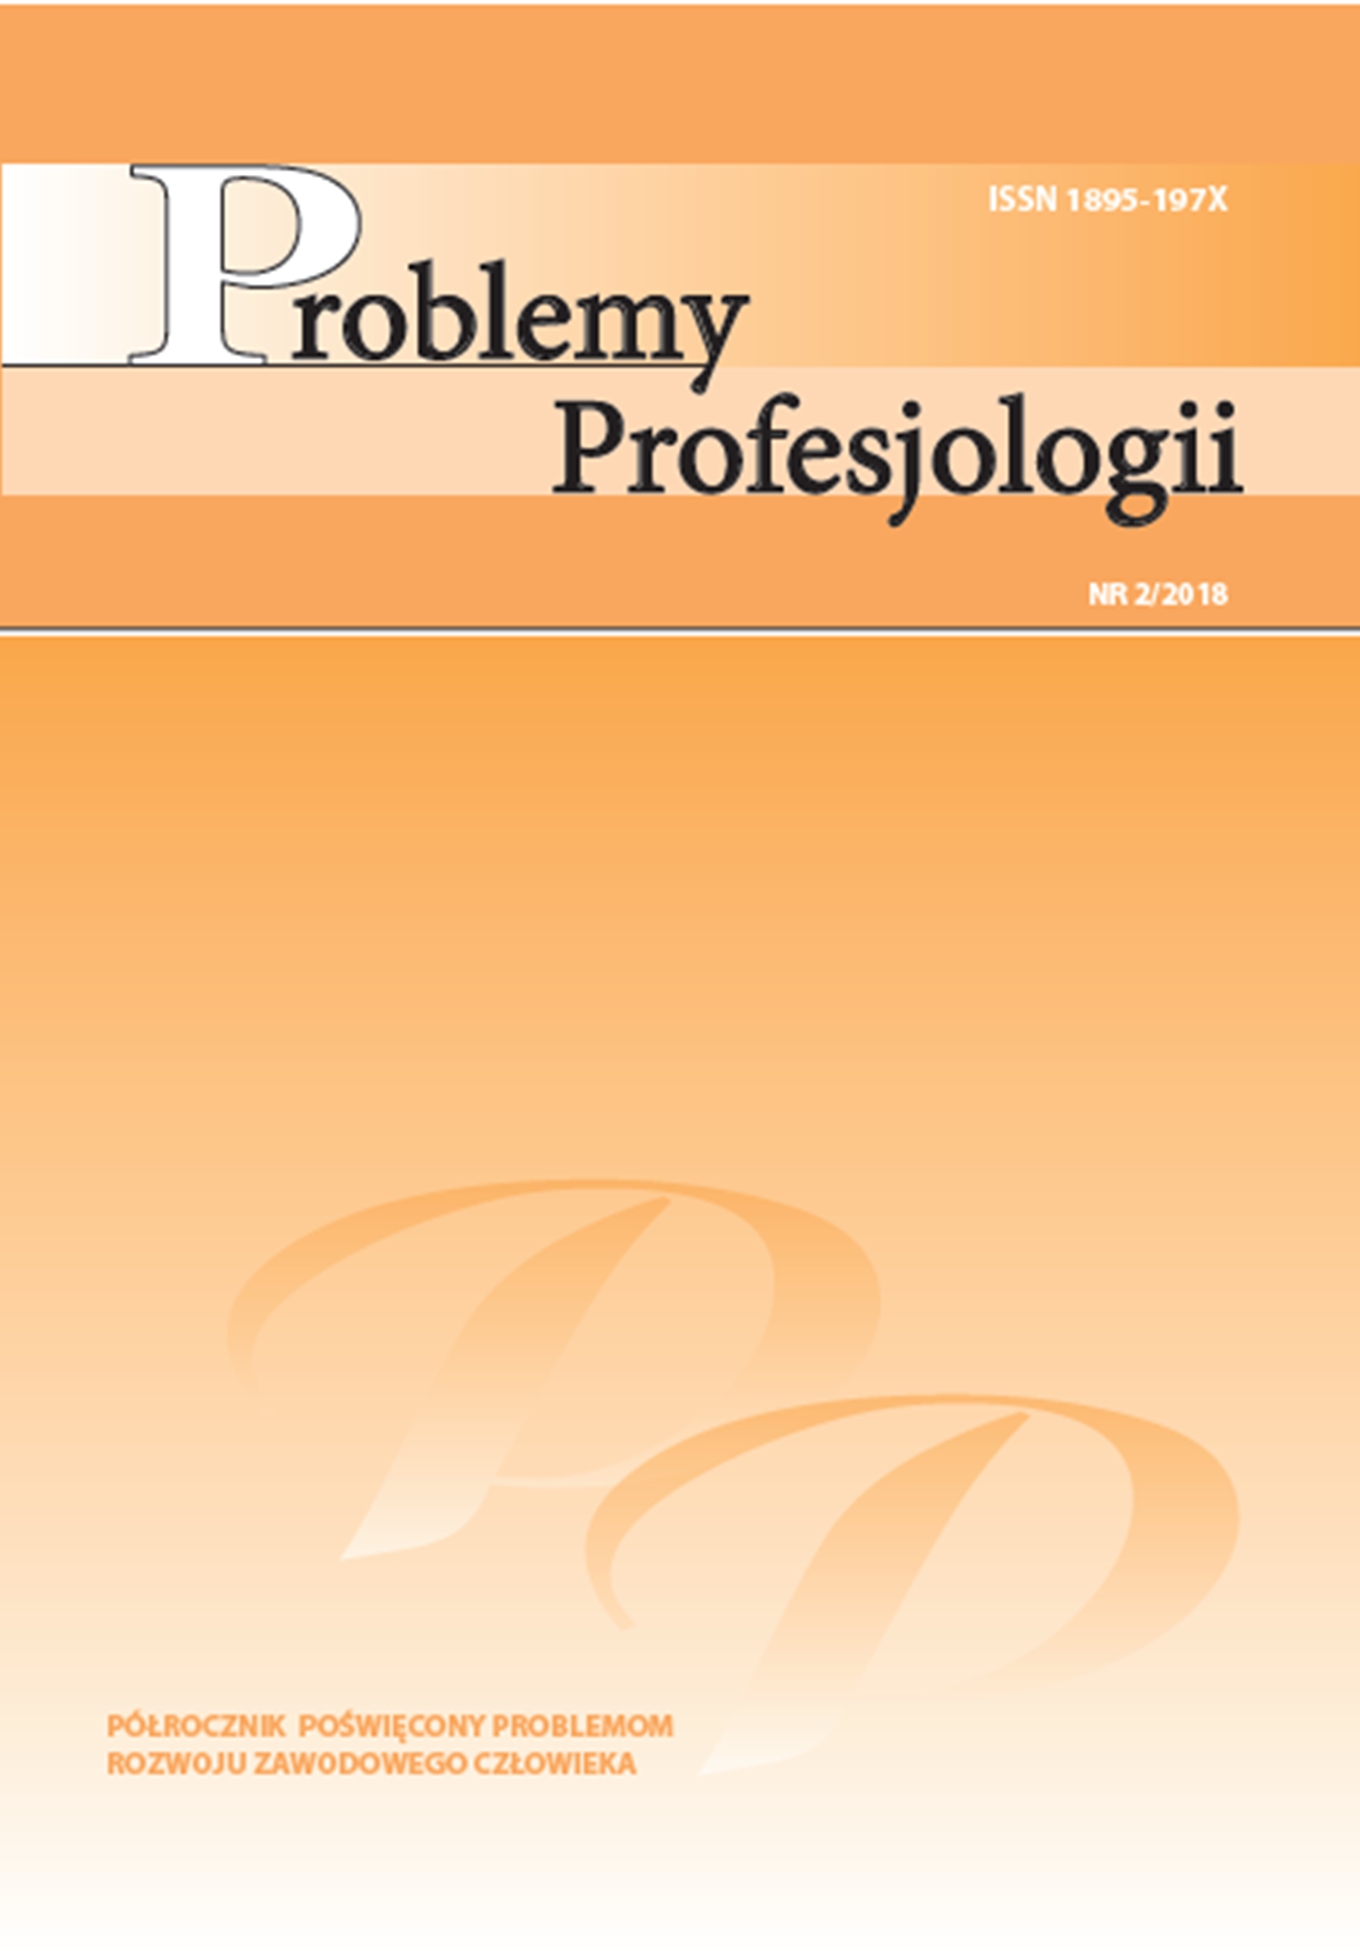 WOMEN'S PROFESSIONAL SELF-FULFILLMENT IN THE PODKARPACKIE LABOUR MARKET – RESEARCH REPORT Cover Image